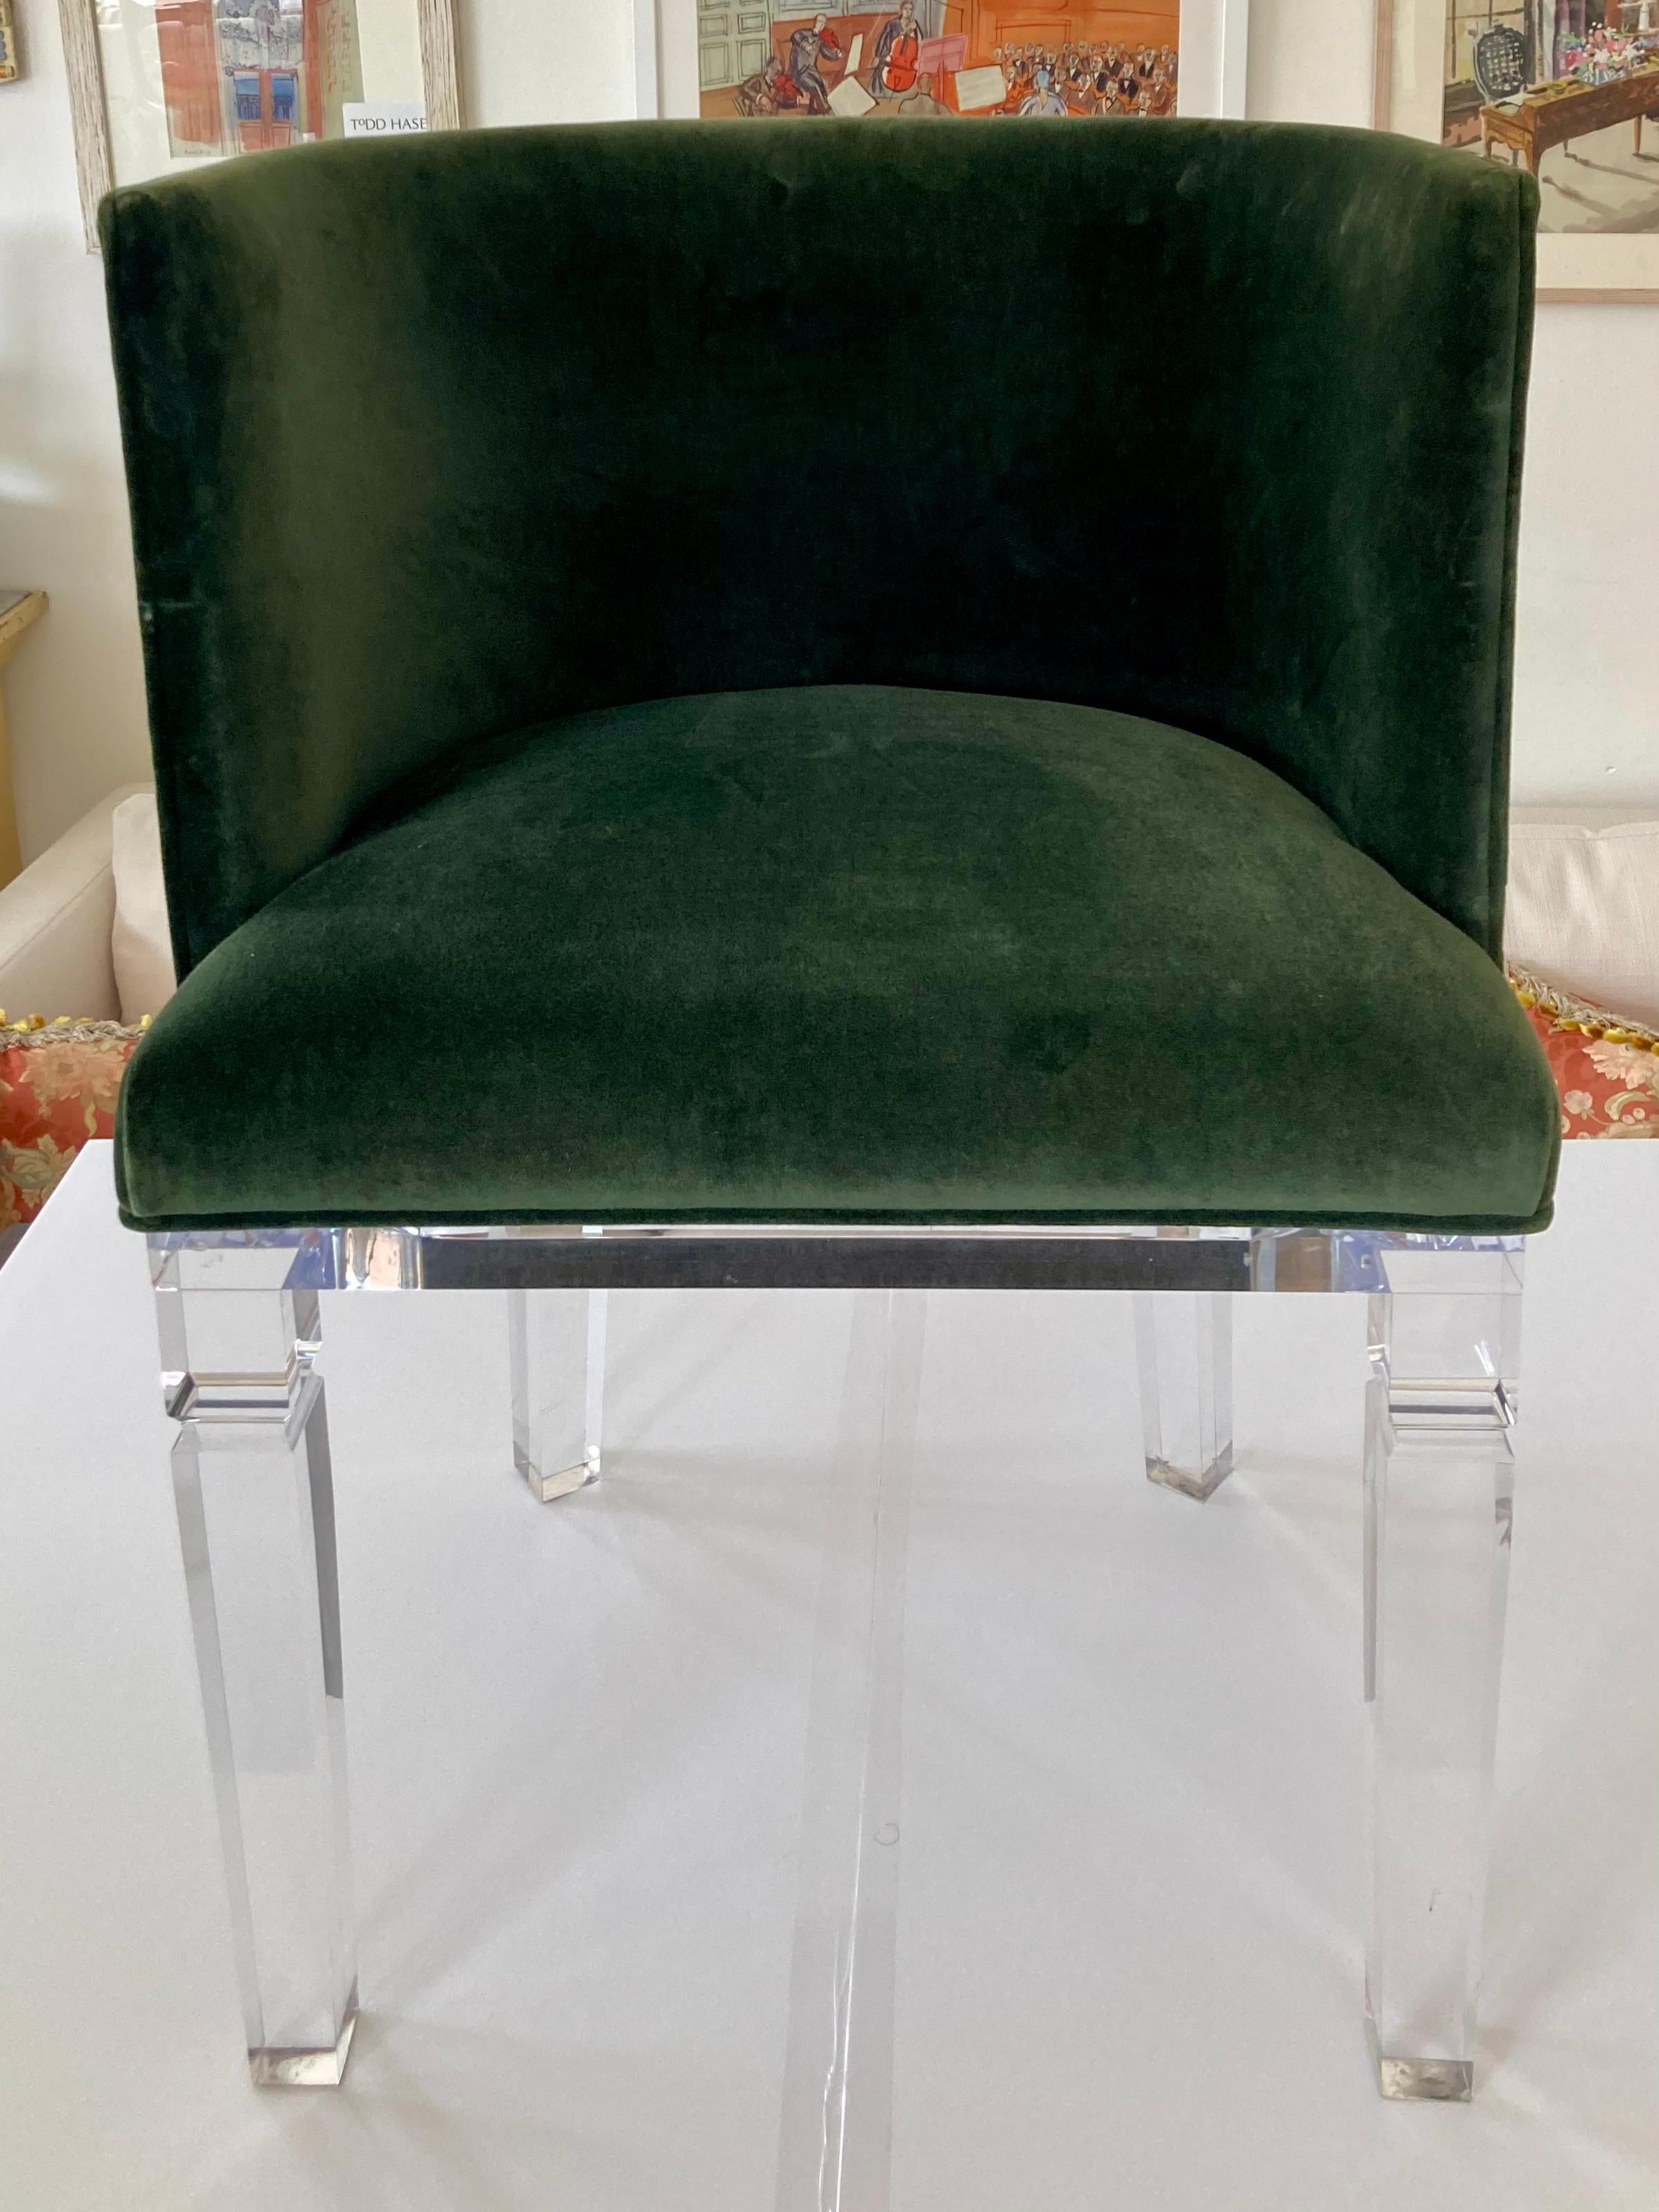 Fabulous vintage Lucite upholstered occasional chair. Upholstered in a nice dark green velvet. Interesting design pattern on the thick Lucite base. Heavy thick Lucite material was used to fabricate this chair. Very nice condition for the age.